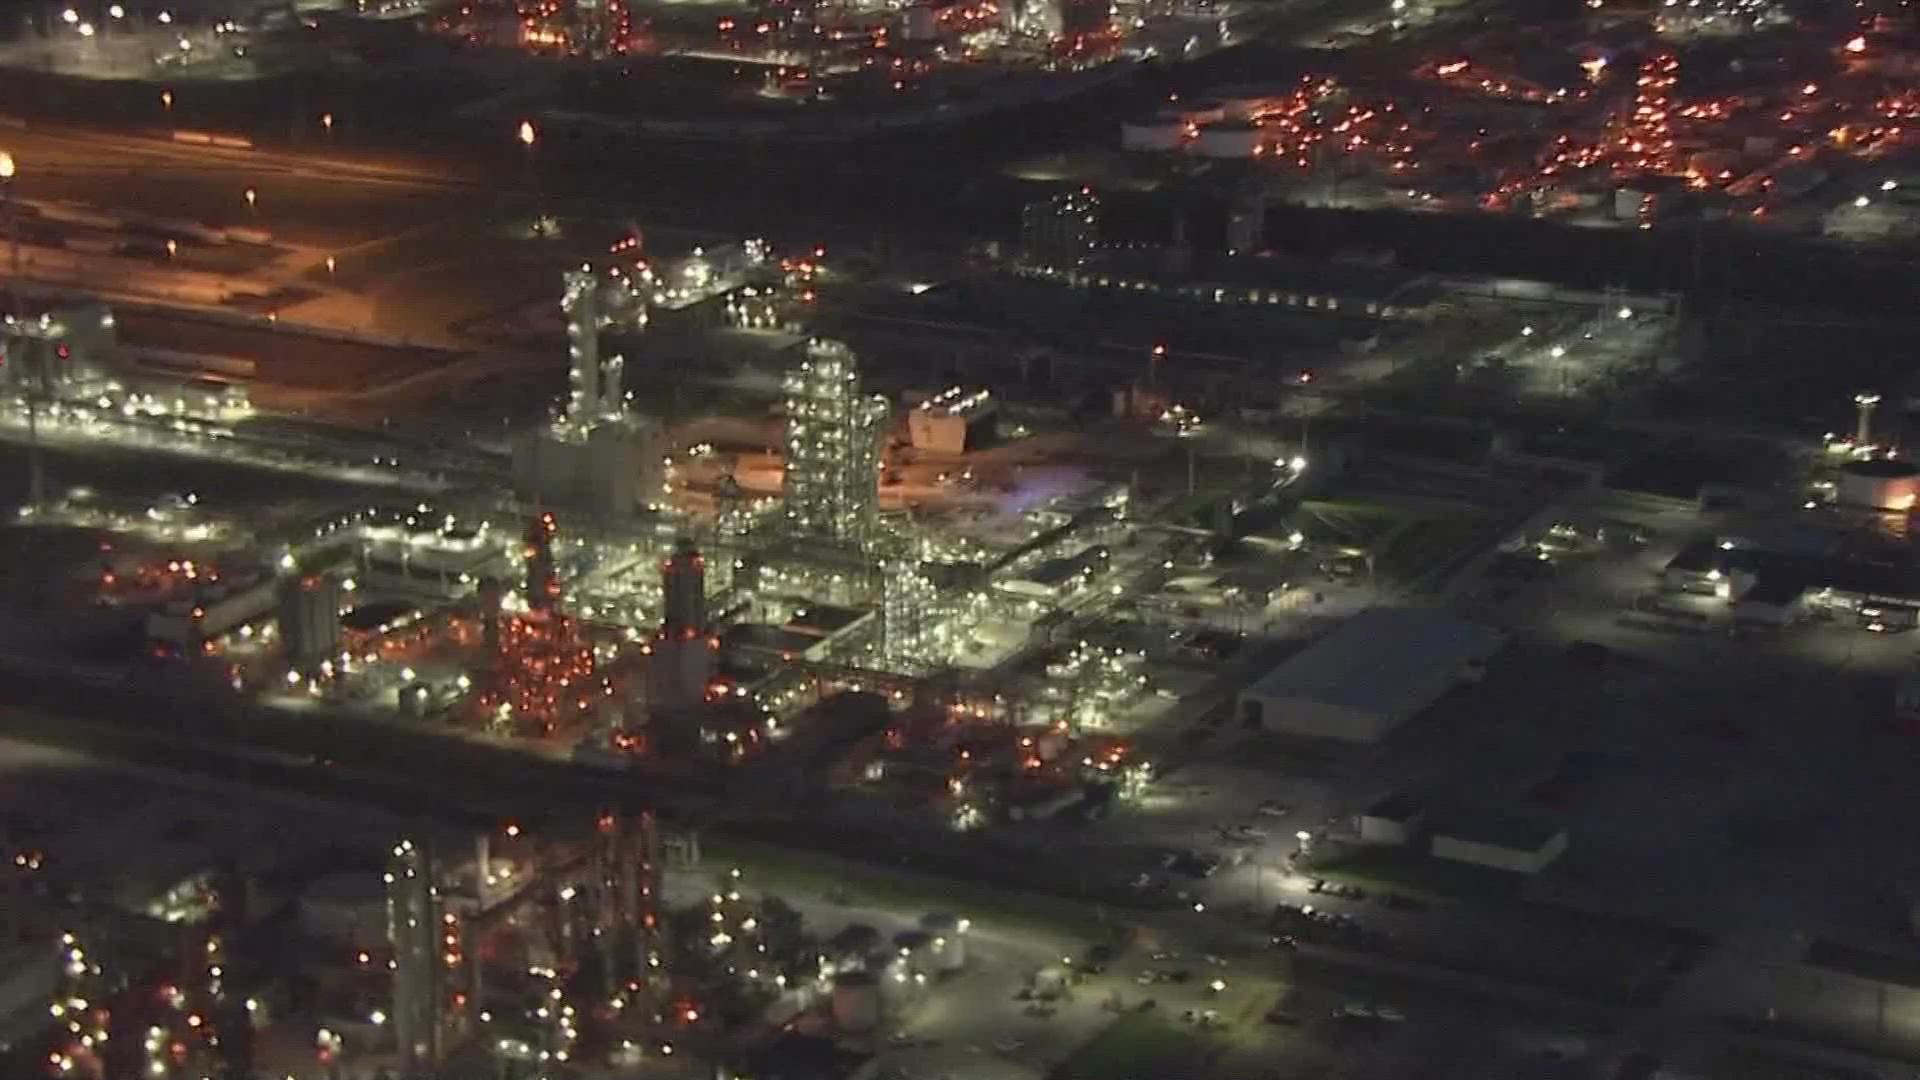 Nearly a dozen lawsuits have been filled against LyondellBasell after a chemical leak killed two people and injured dozens others.